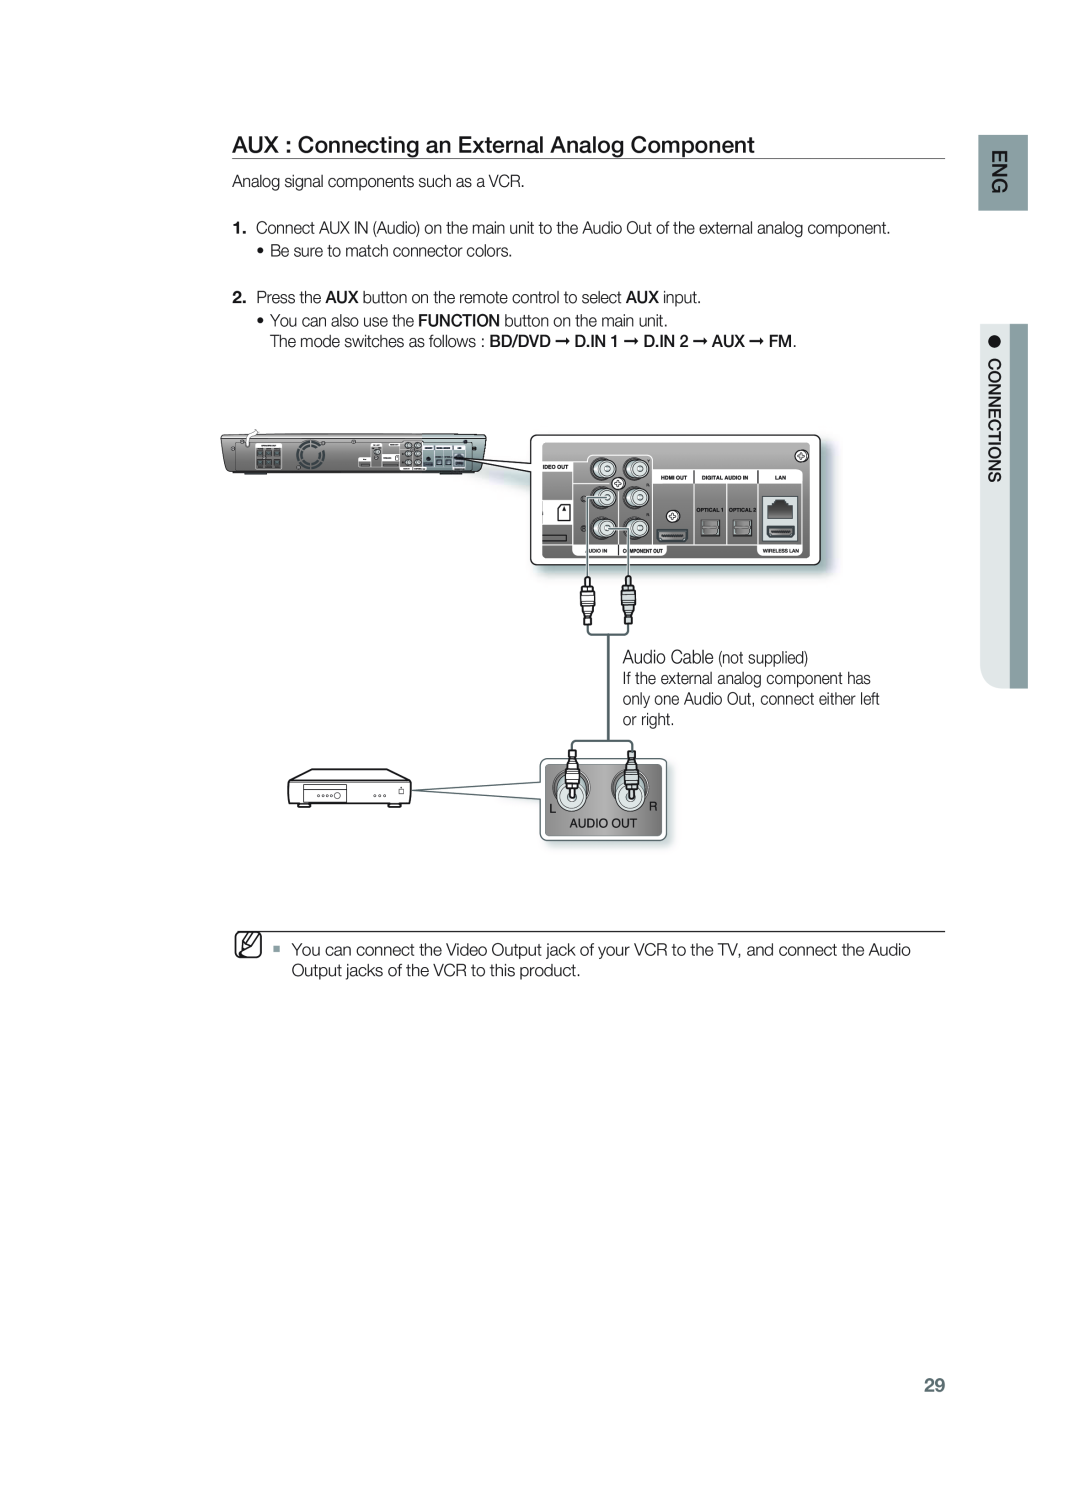 Samsung HT-BD1252, HT-BD1255 user manual AUX : Connecting an External Analog Component 